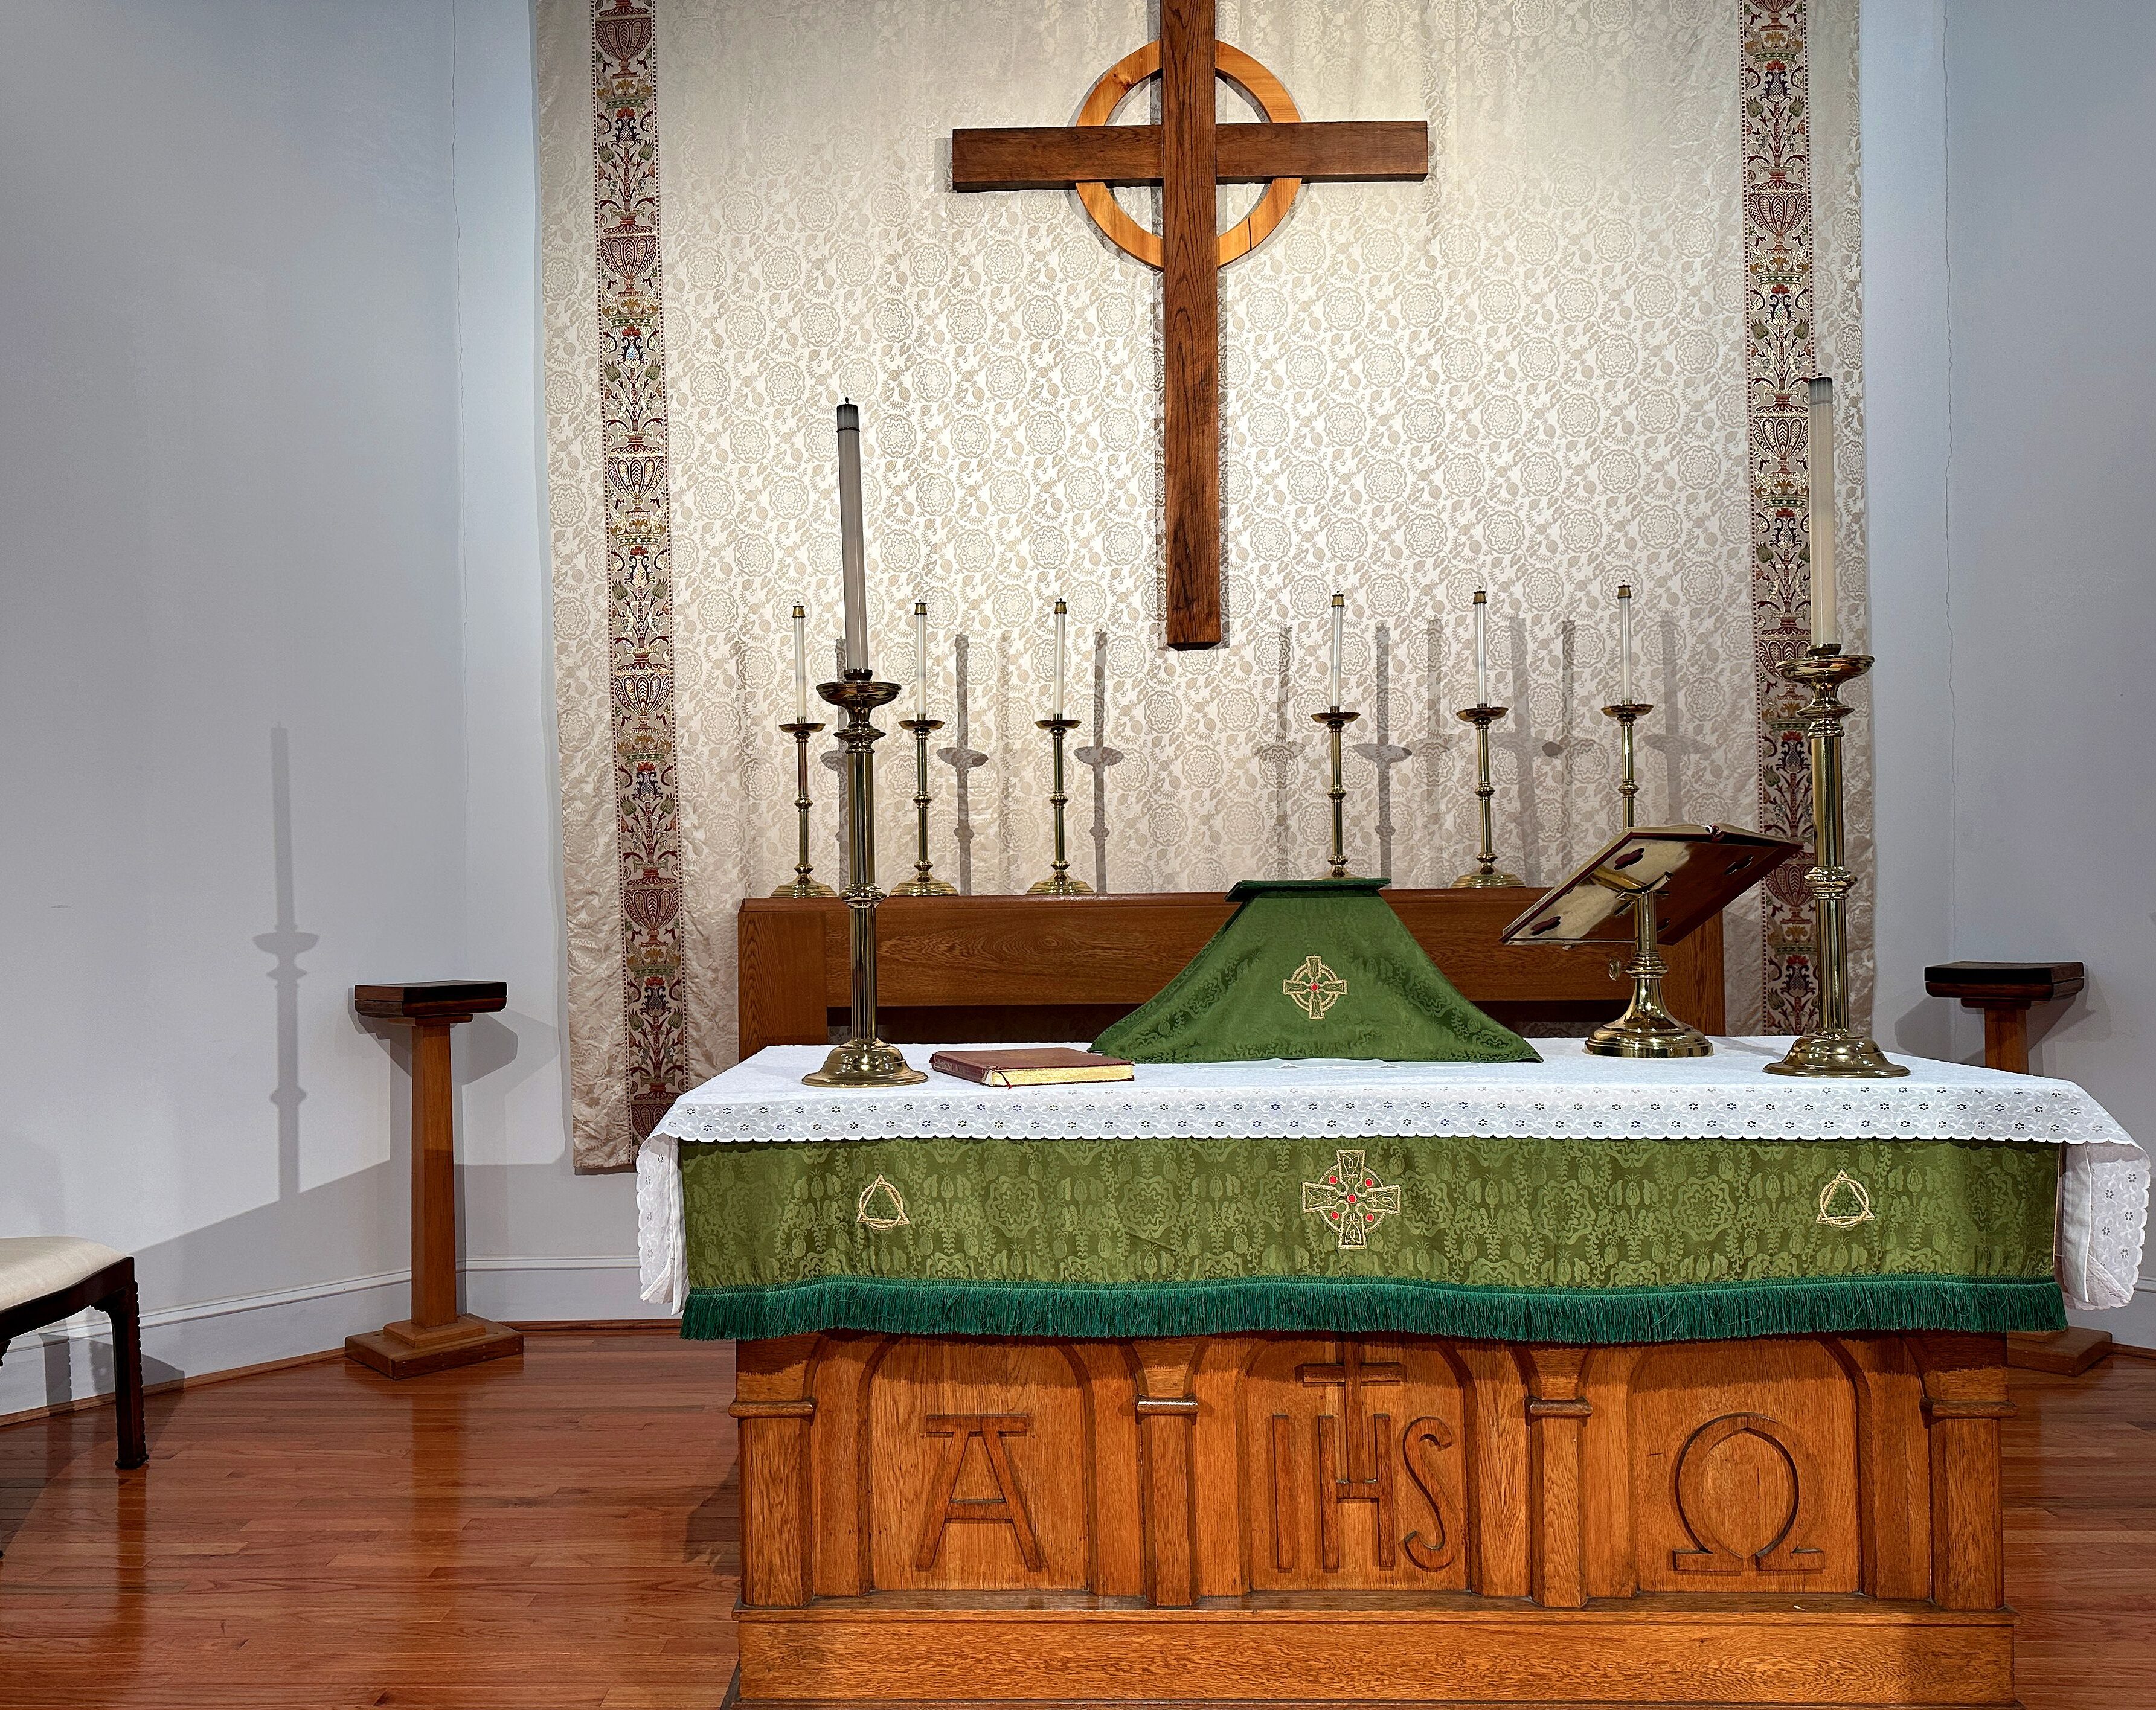 a wooden alter with a cross on the wall